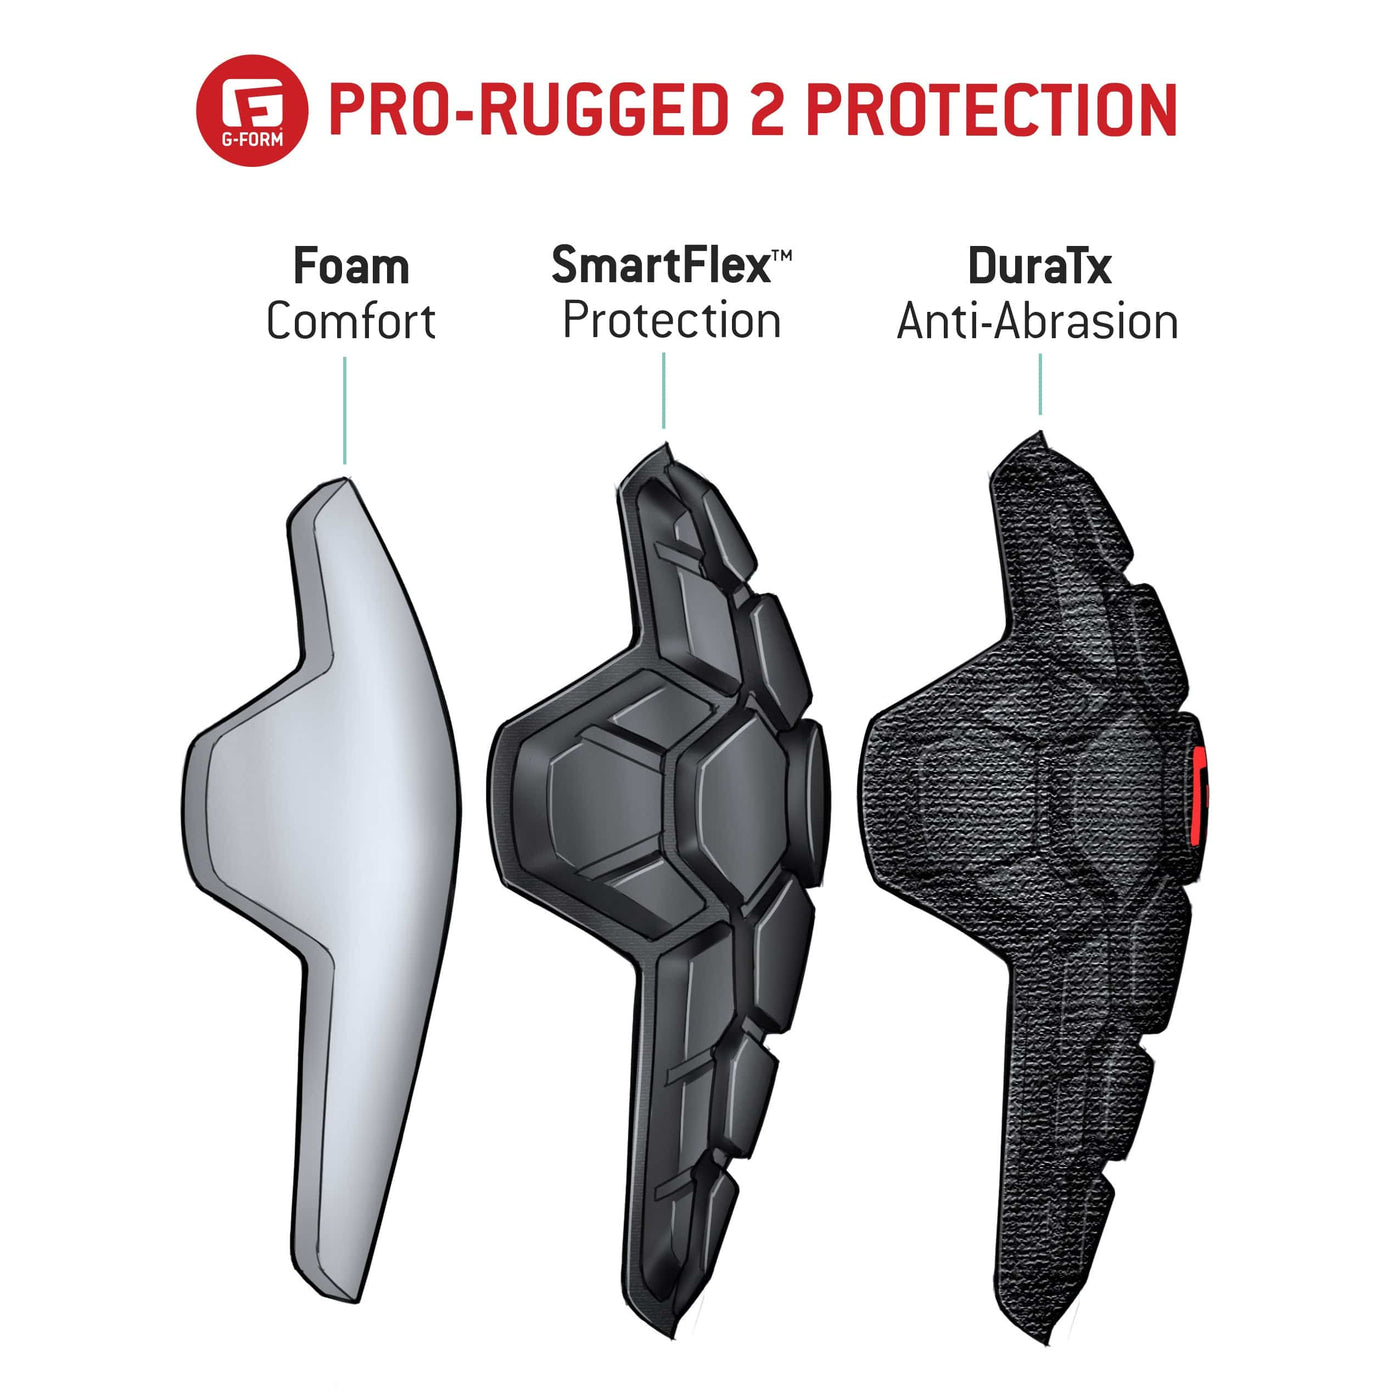 Pro-rugged 2 protection G-Form